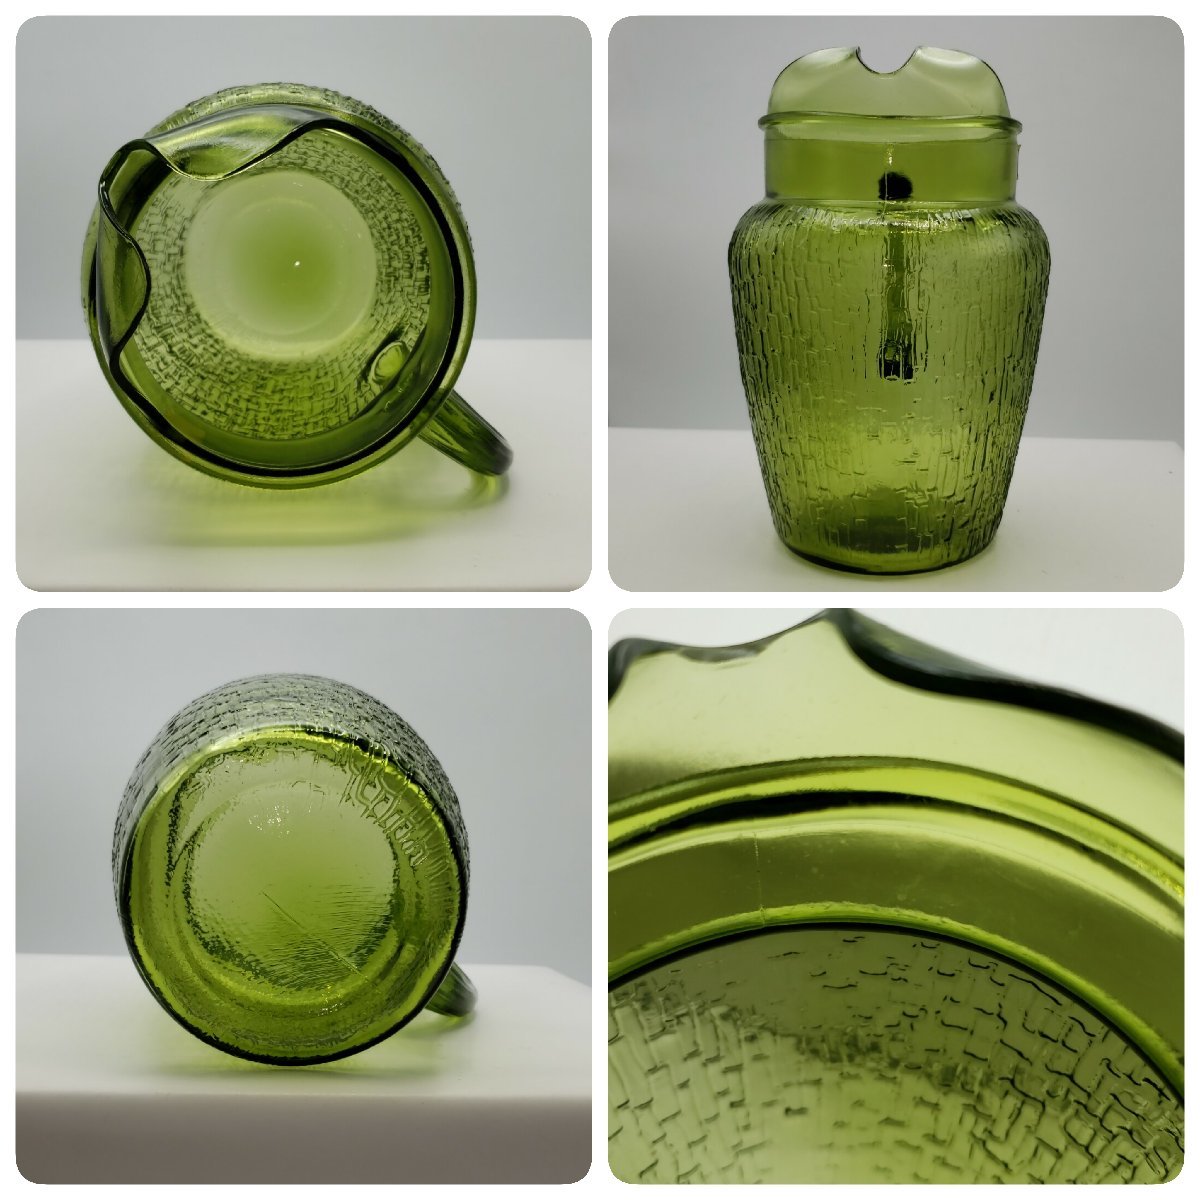  pitcher glass ANCHOR HOCKING anchor ho  King avocado green avocado green green pitcher retro GLASSWARE USA[100s1173]